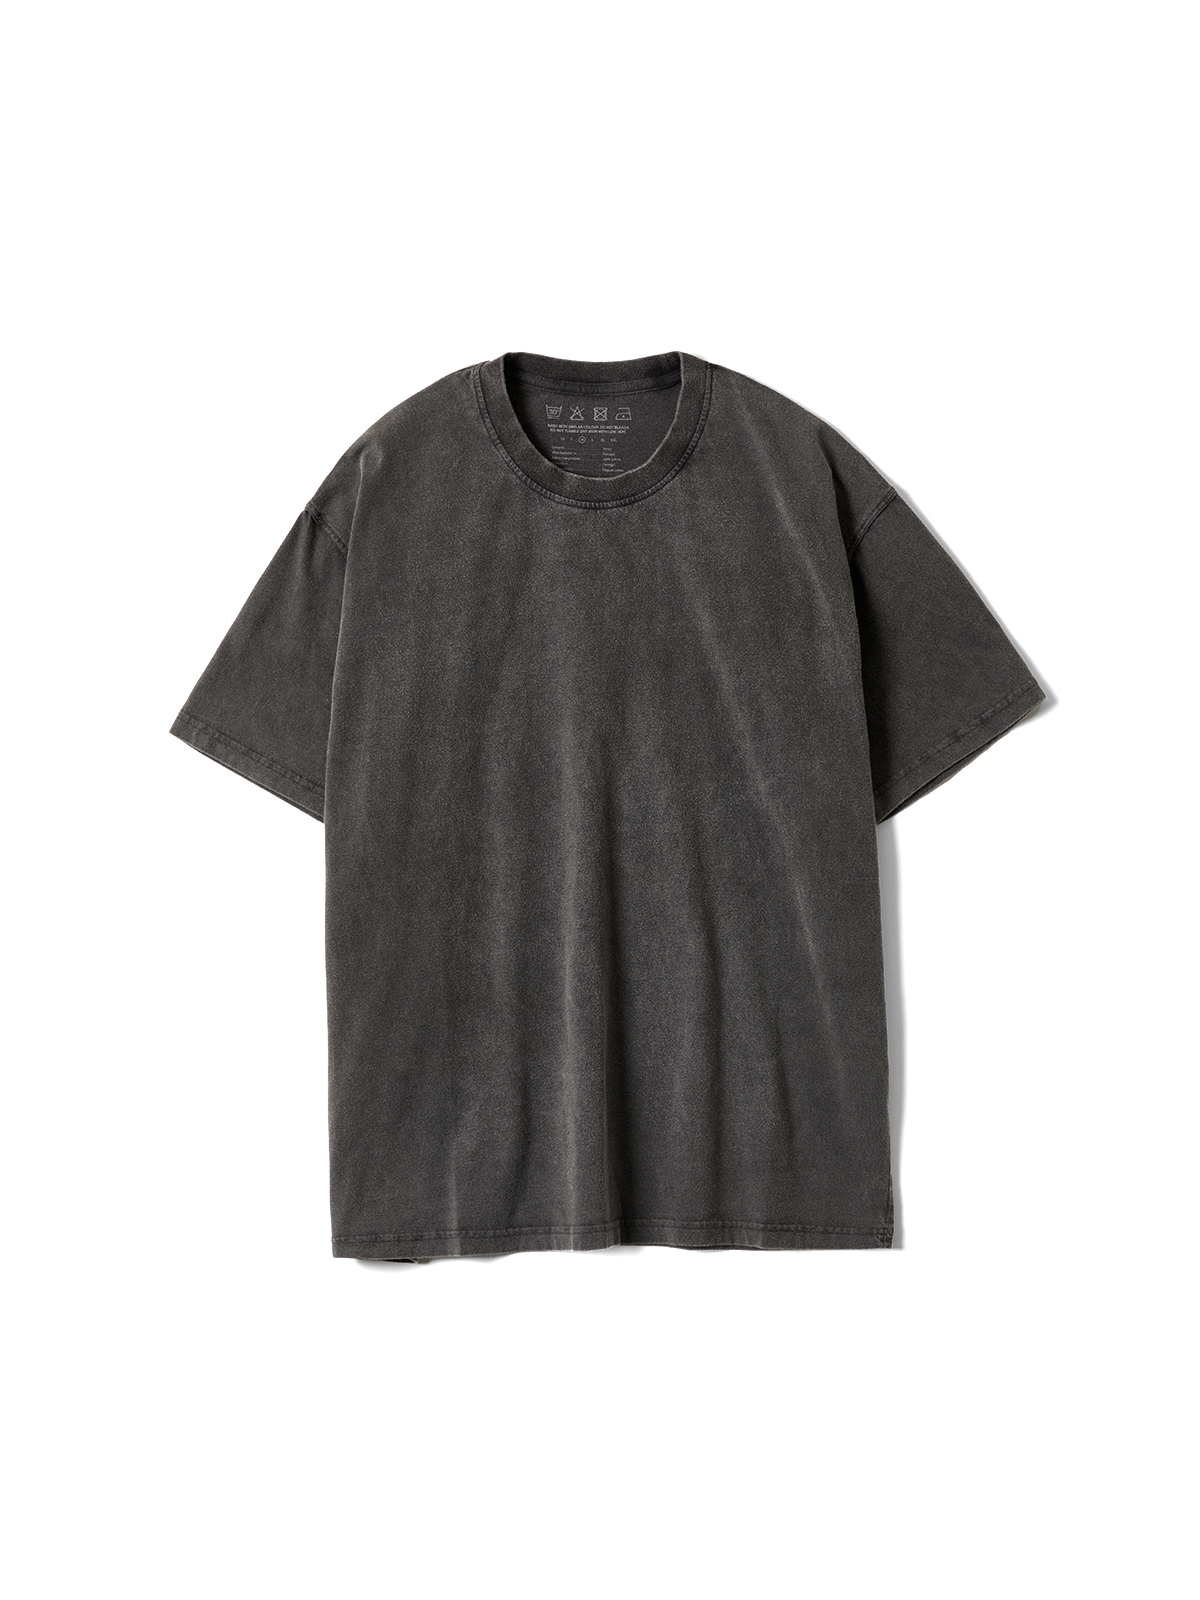 STANDARD TEE (WASHED GRAPHITE)